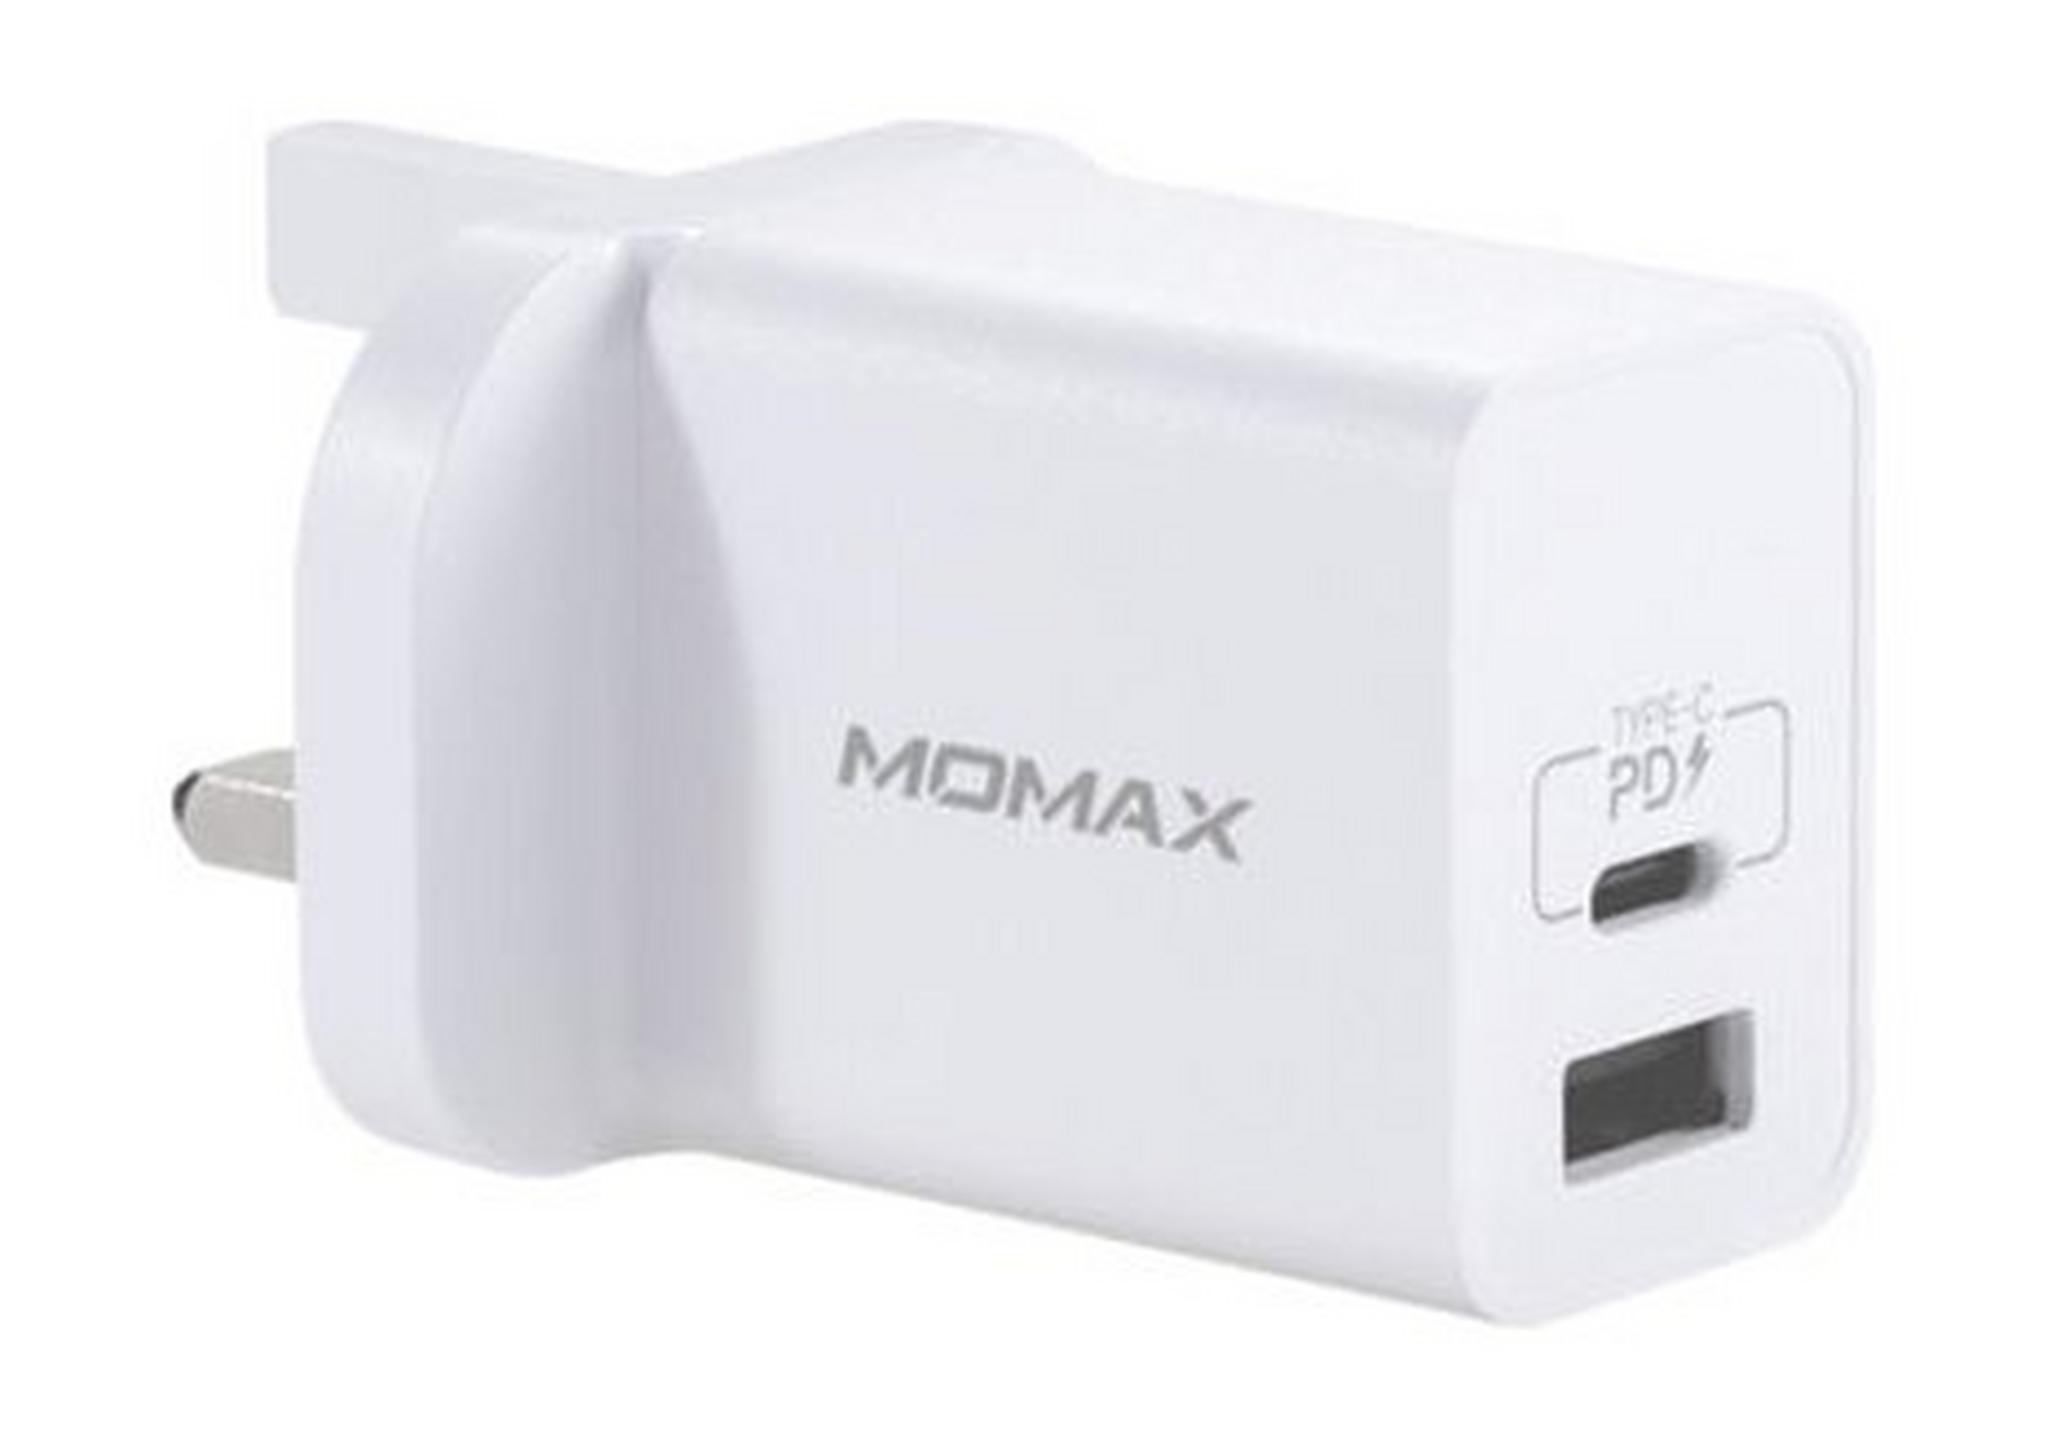 Momax One Plug 2 Ports PD + QC 3.0 USB Fast Charger (UM13UKW) - White